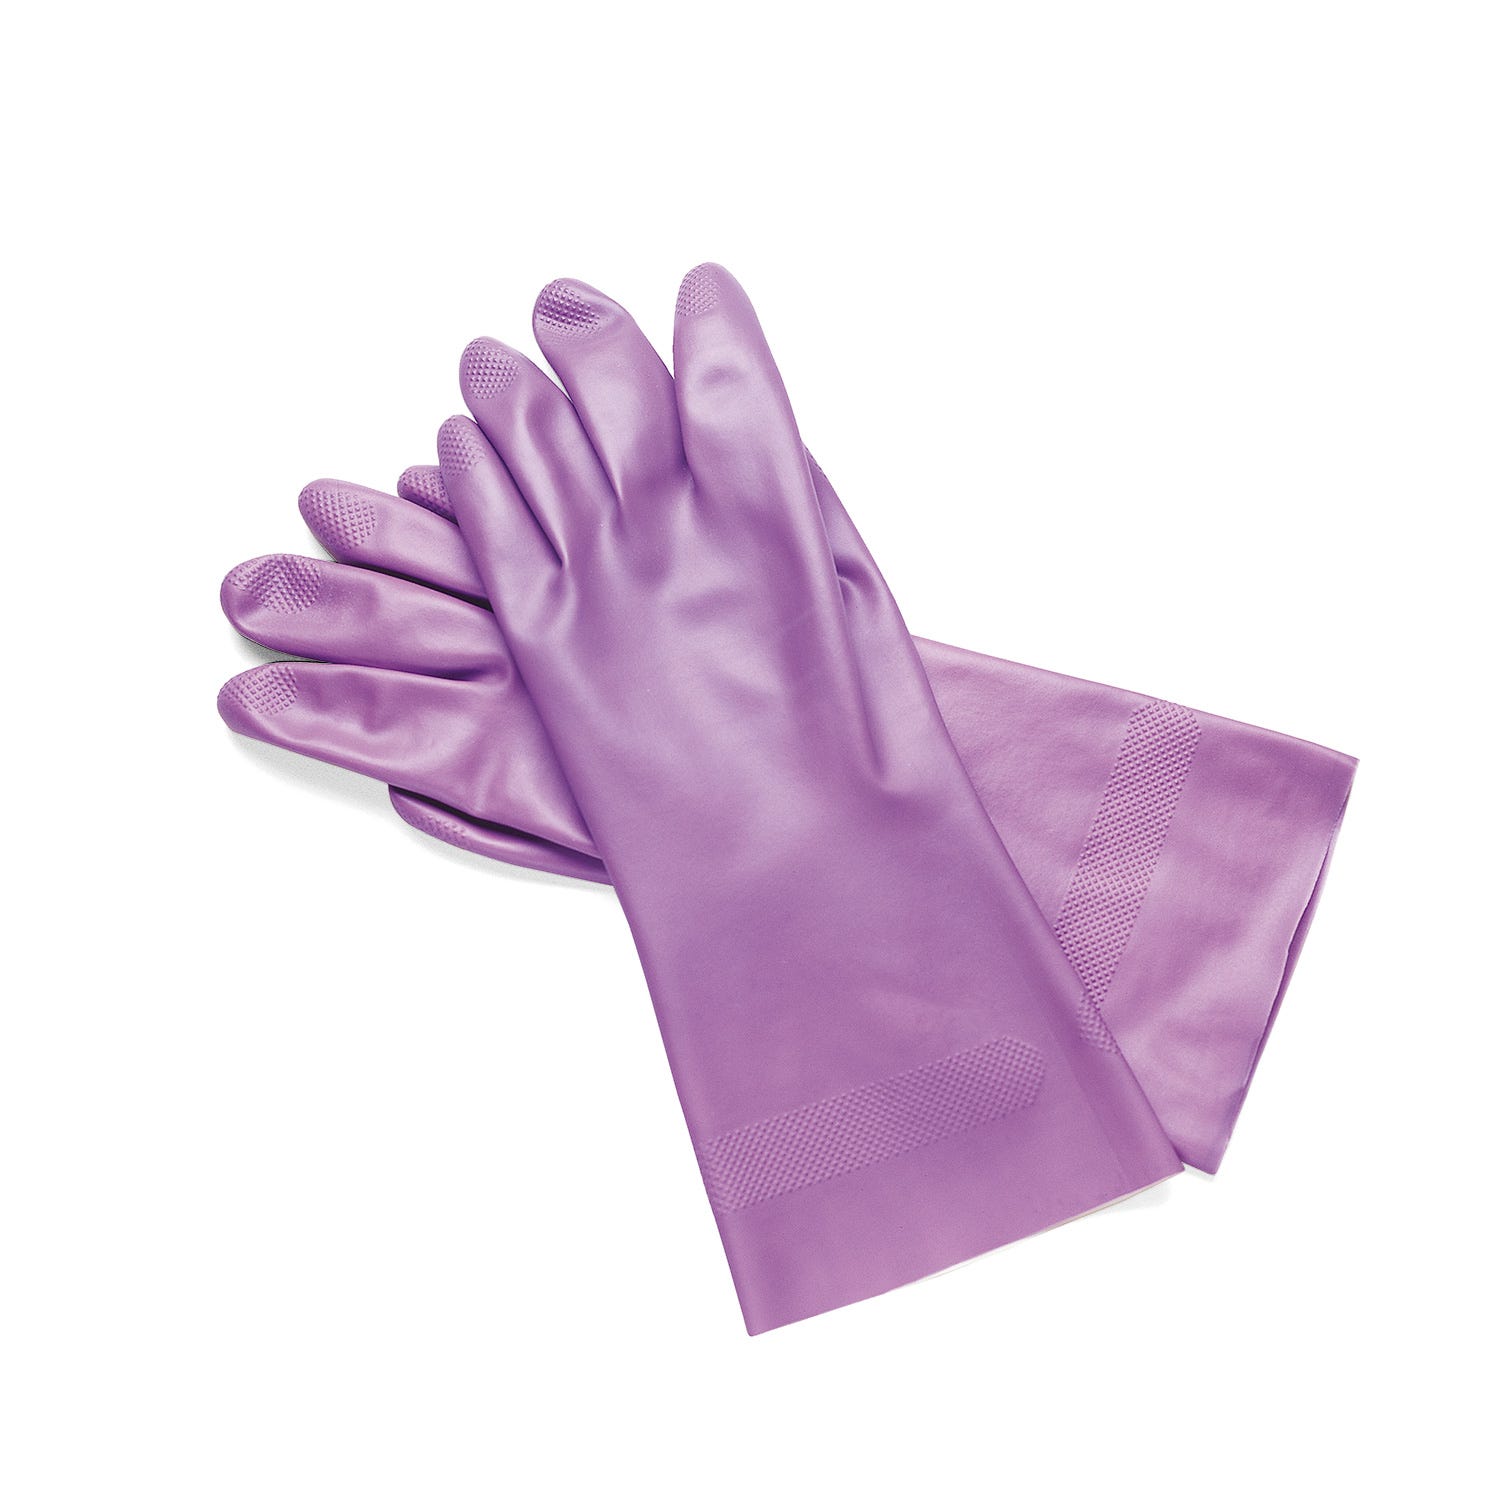 Glove Nitrile Utility X-Large Size 10, Lilac - 3prs/Pack